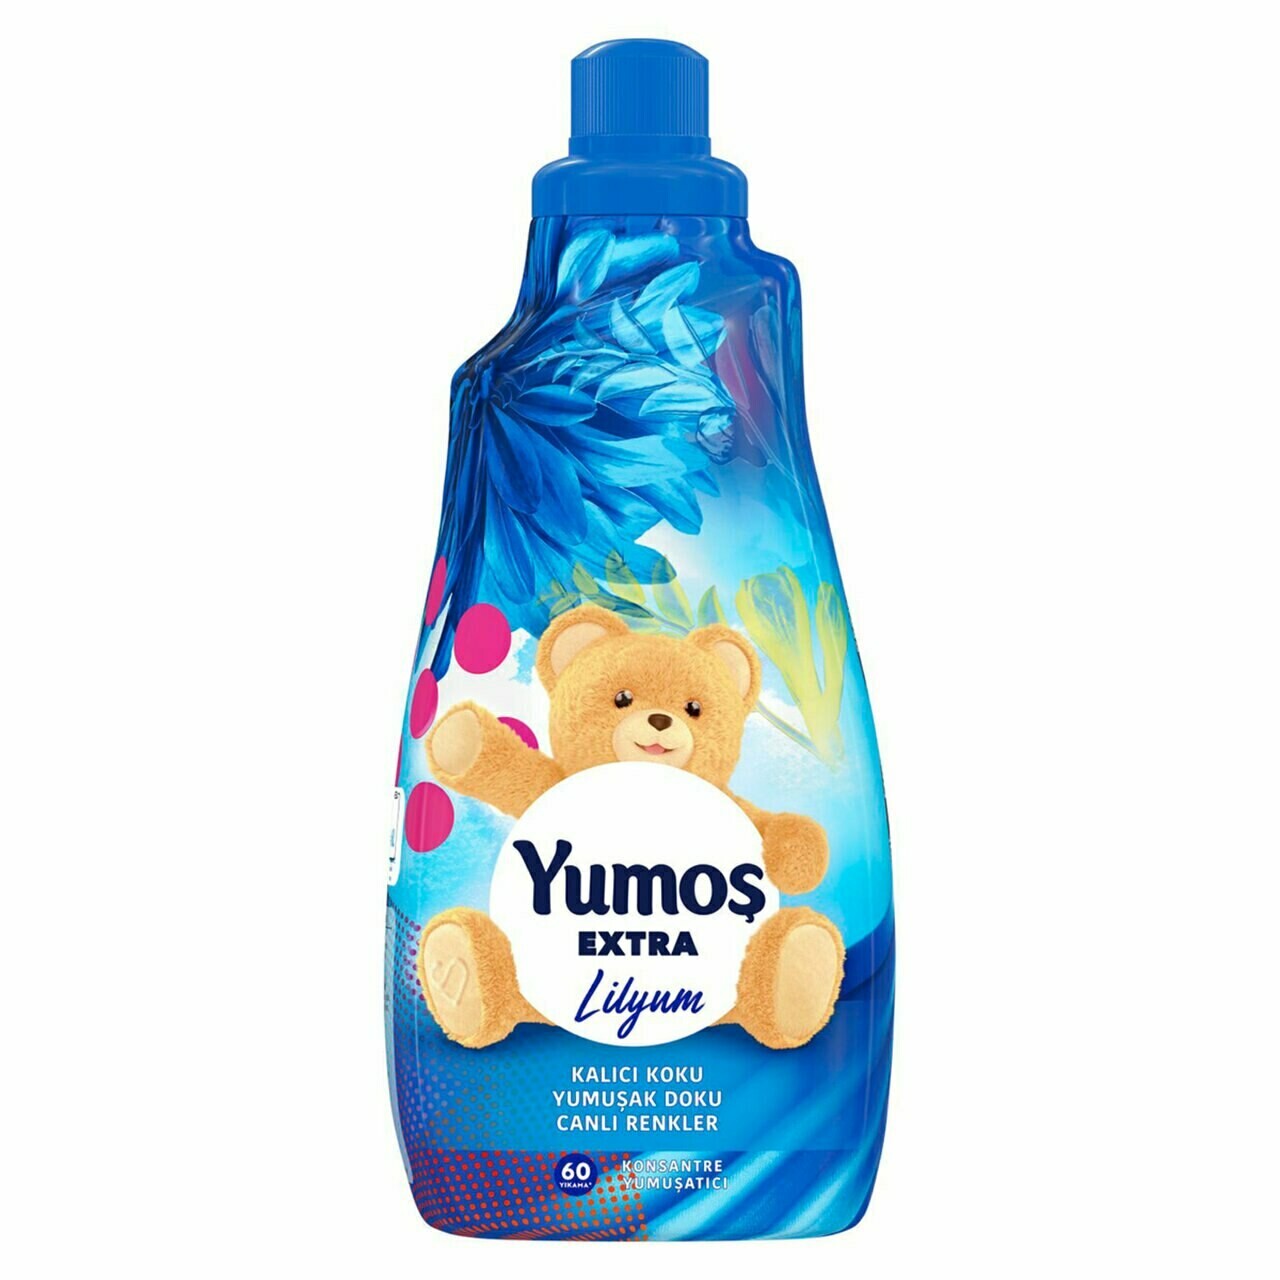 YUMOS Laundry Fabric Softener Concentrated Lilyum 1440mL